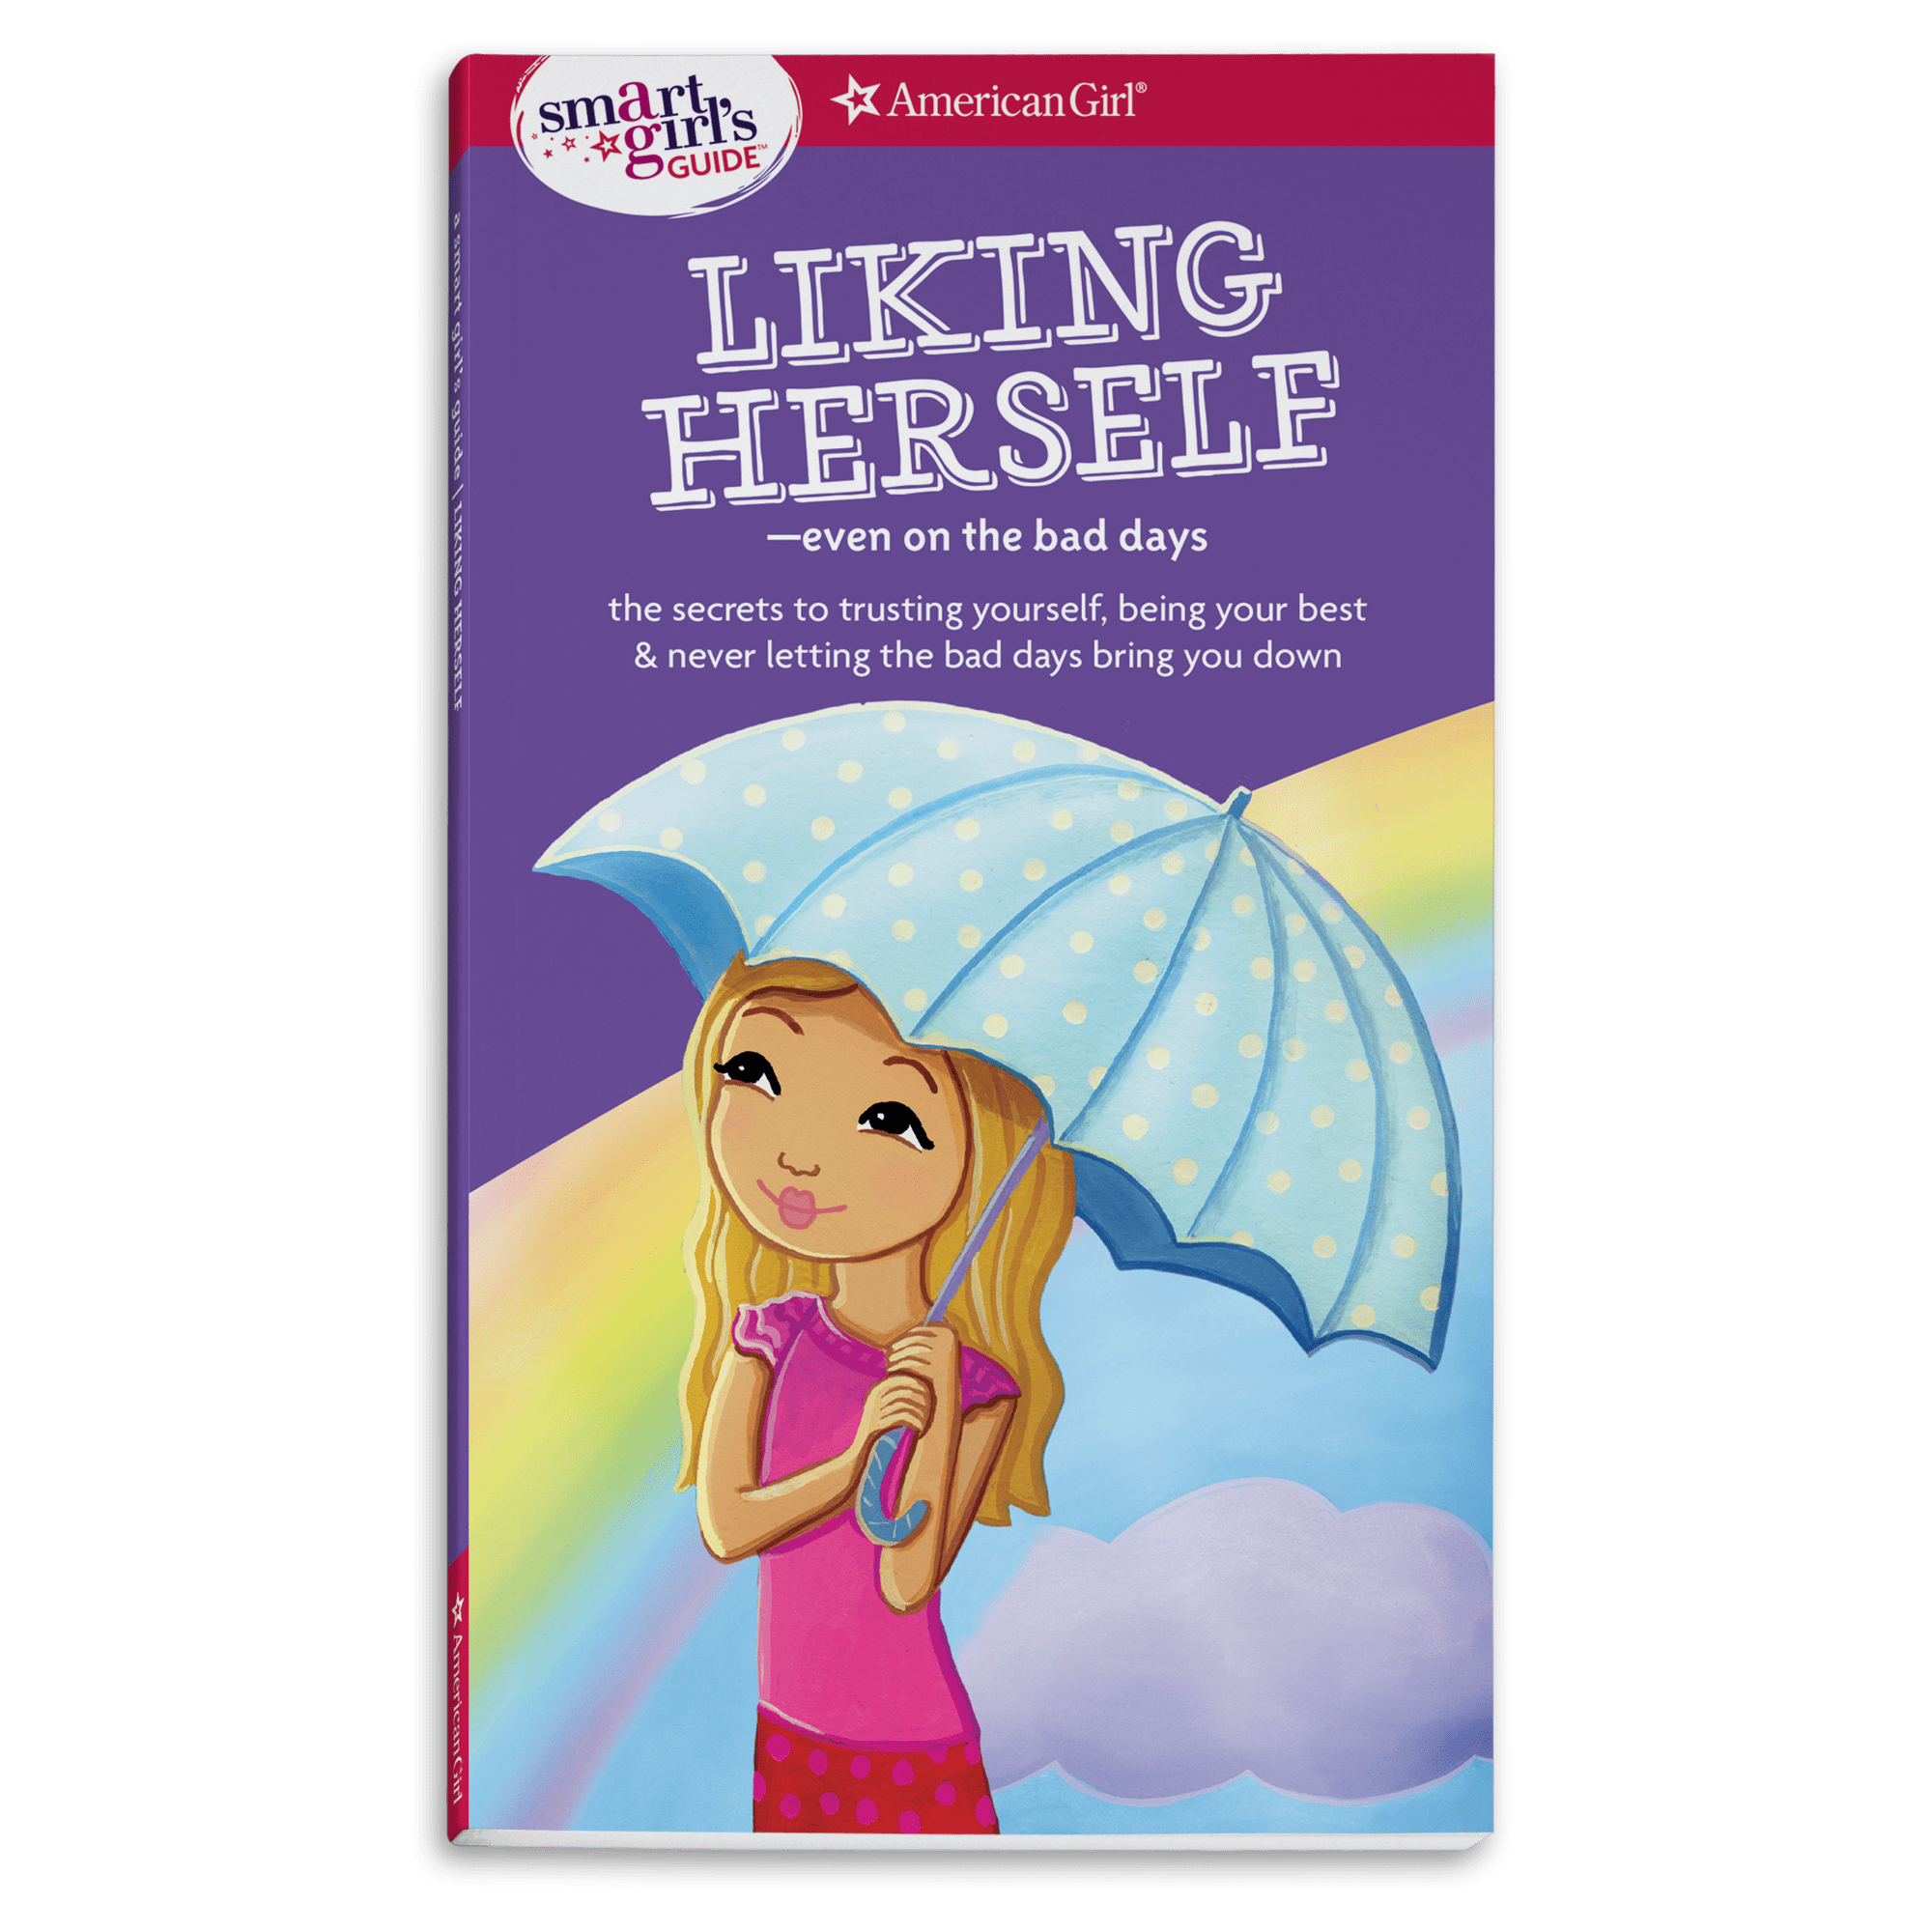 A Smart Girl's Guide: Liking Herself